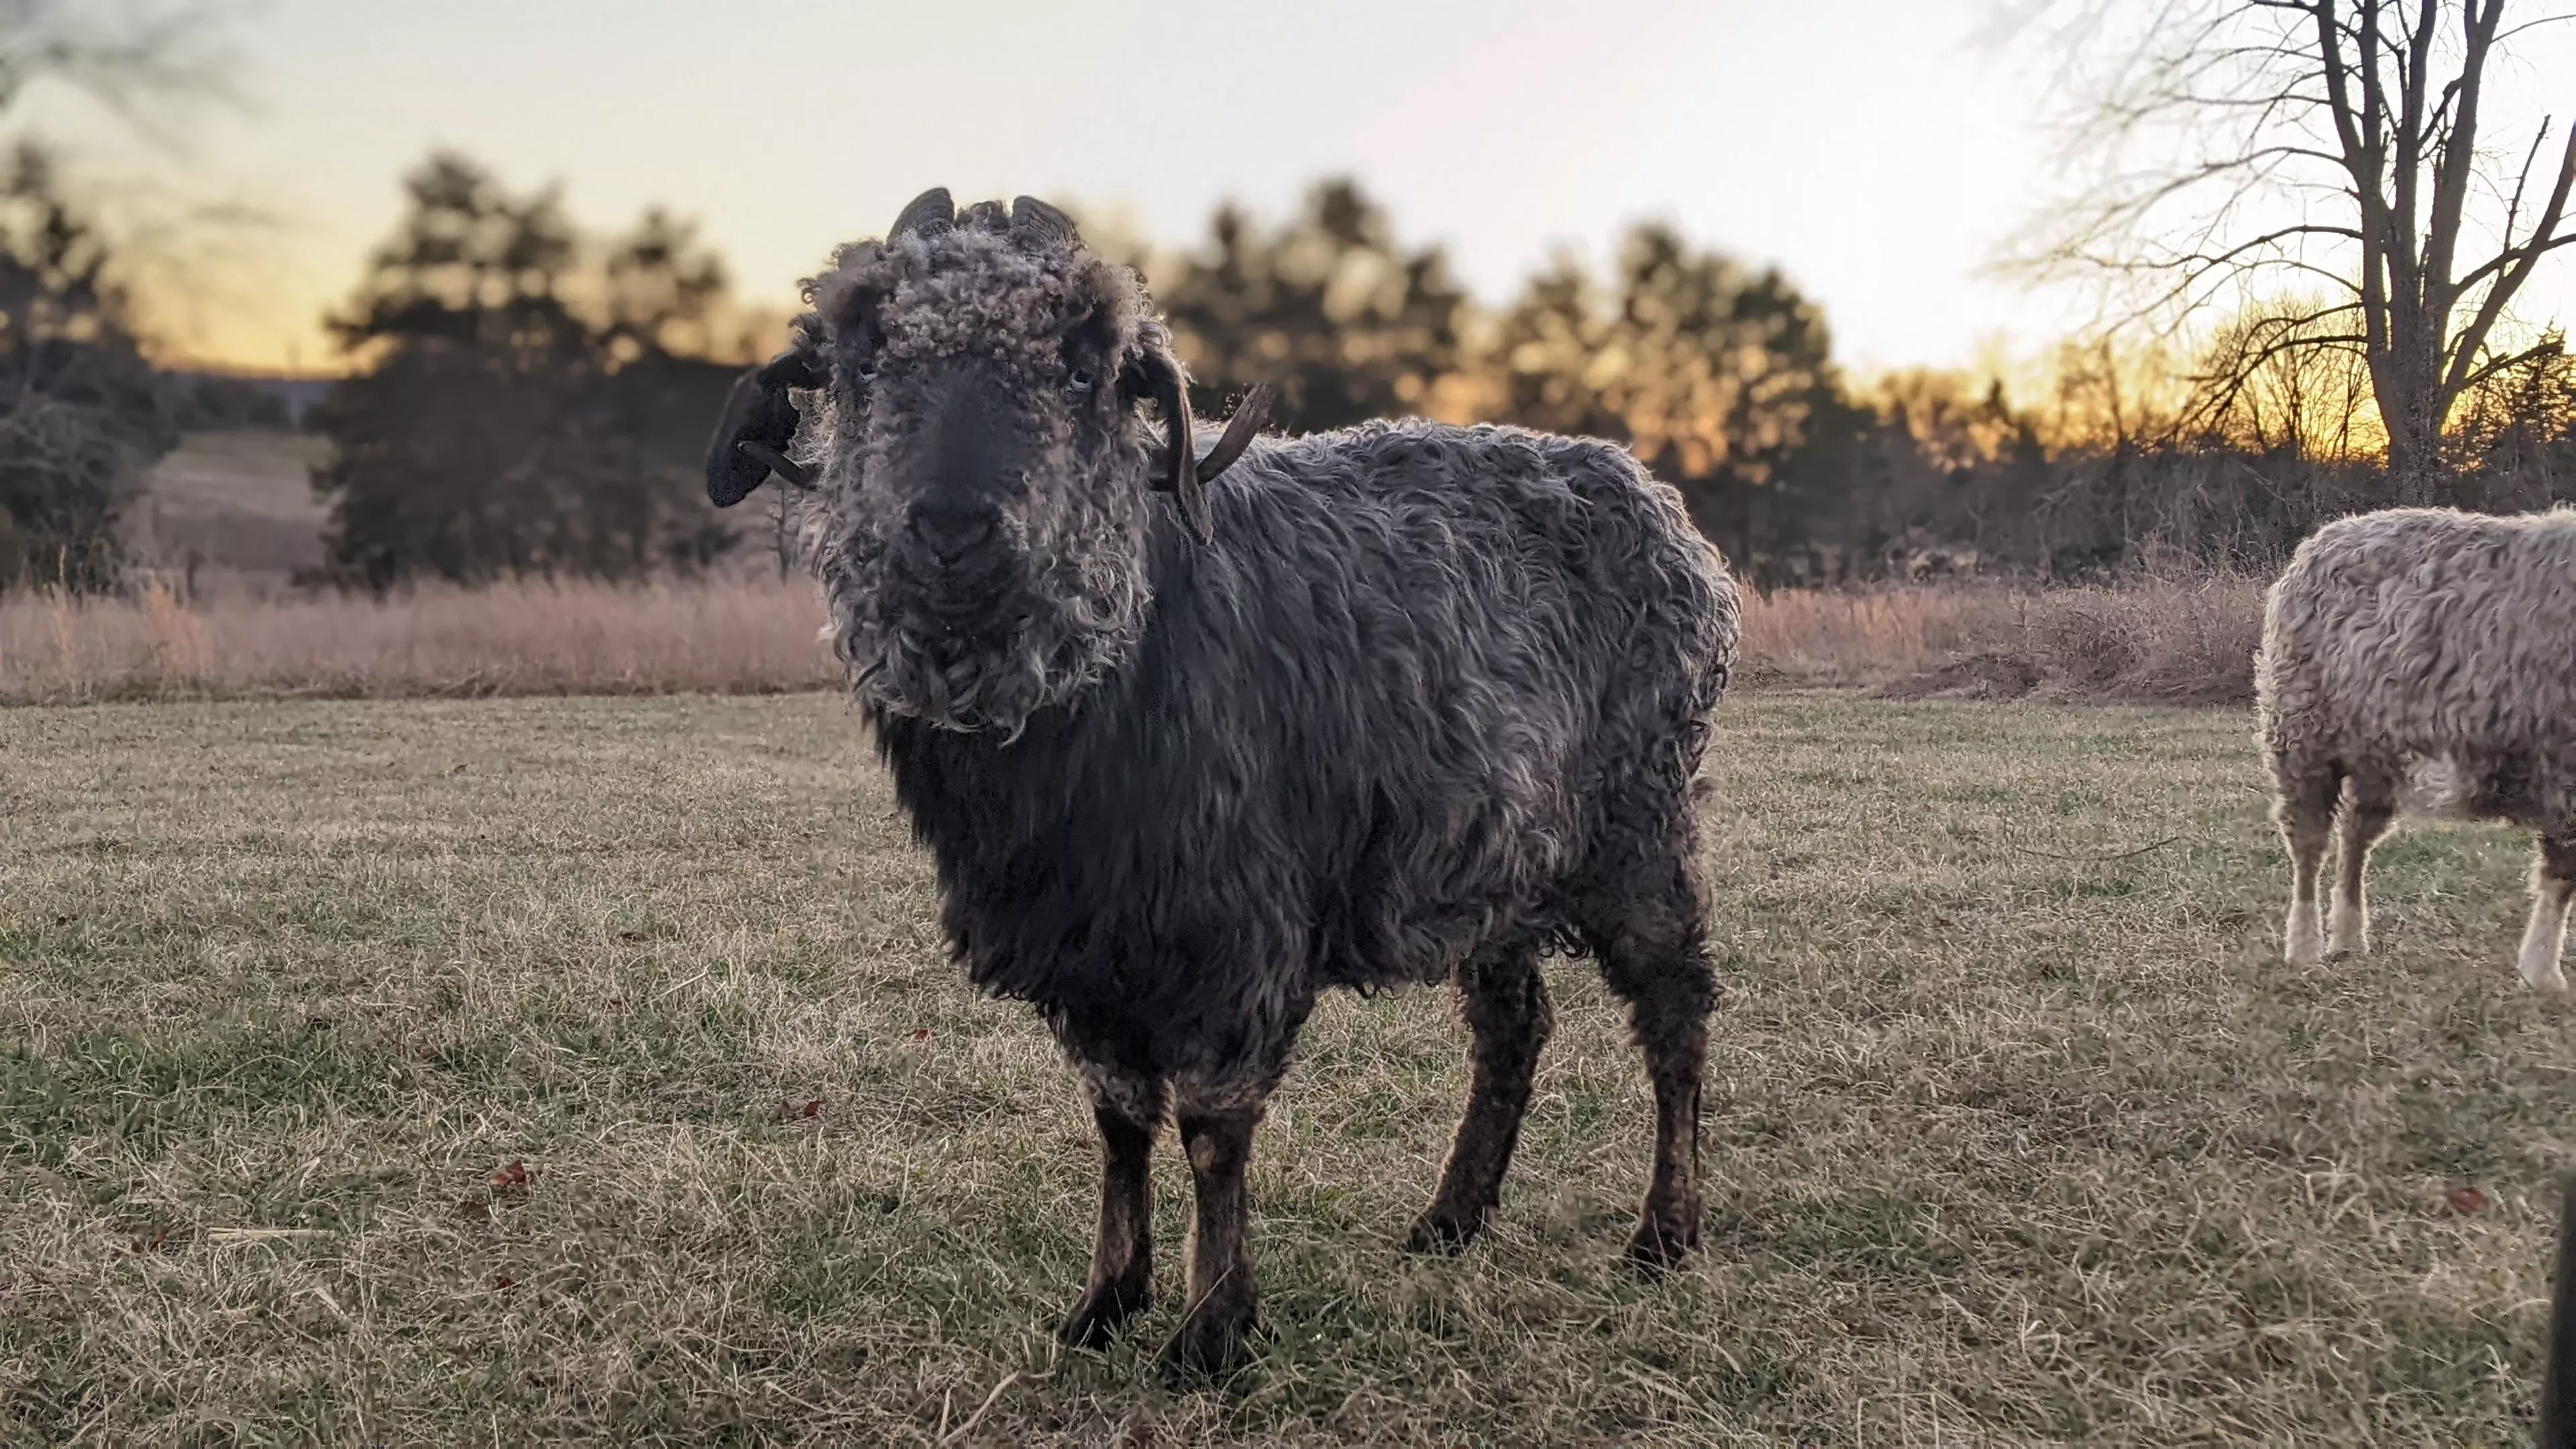 A portrait image of a goat named Hermione